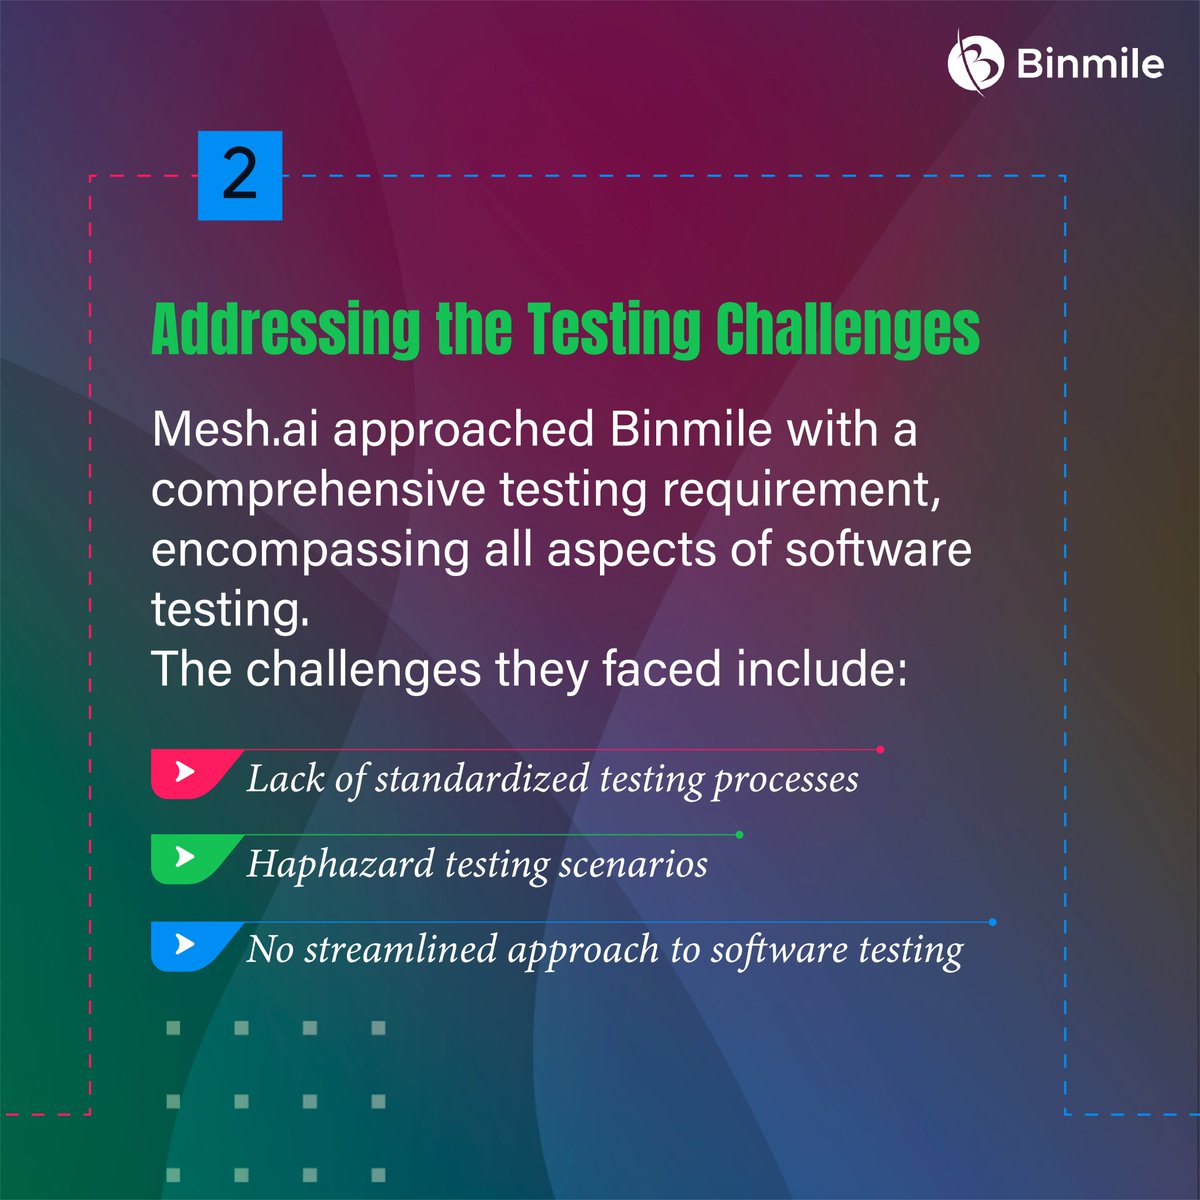 Testing challenges tackled! 
Mesh.ai partnered with Binmile for comprehensive testing. 
Overcame lack of standardized processes, haphazard scenarios, & streamlined software testing. 
Success achieved! 
#SoftwareTesting #QualityAssurance